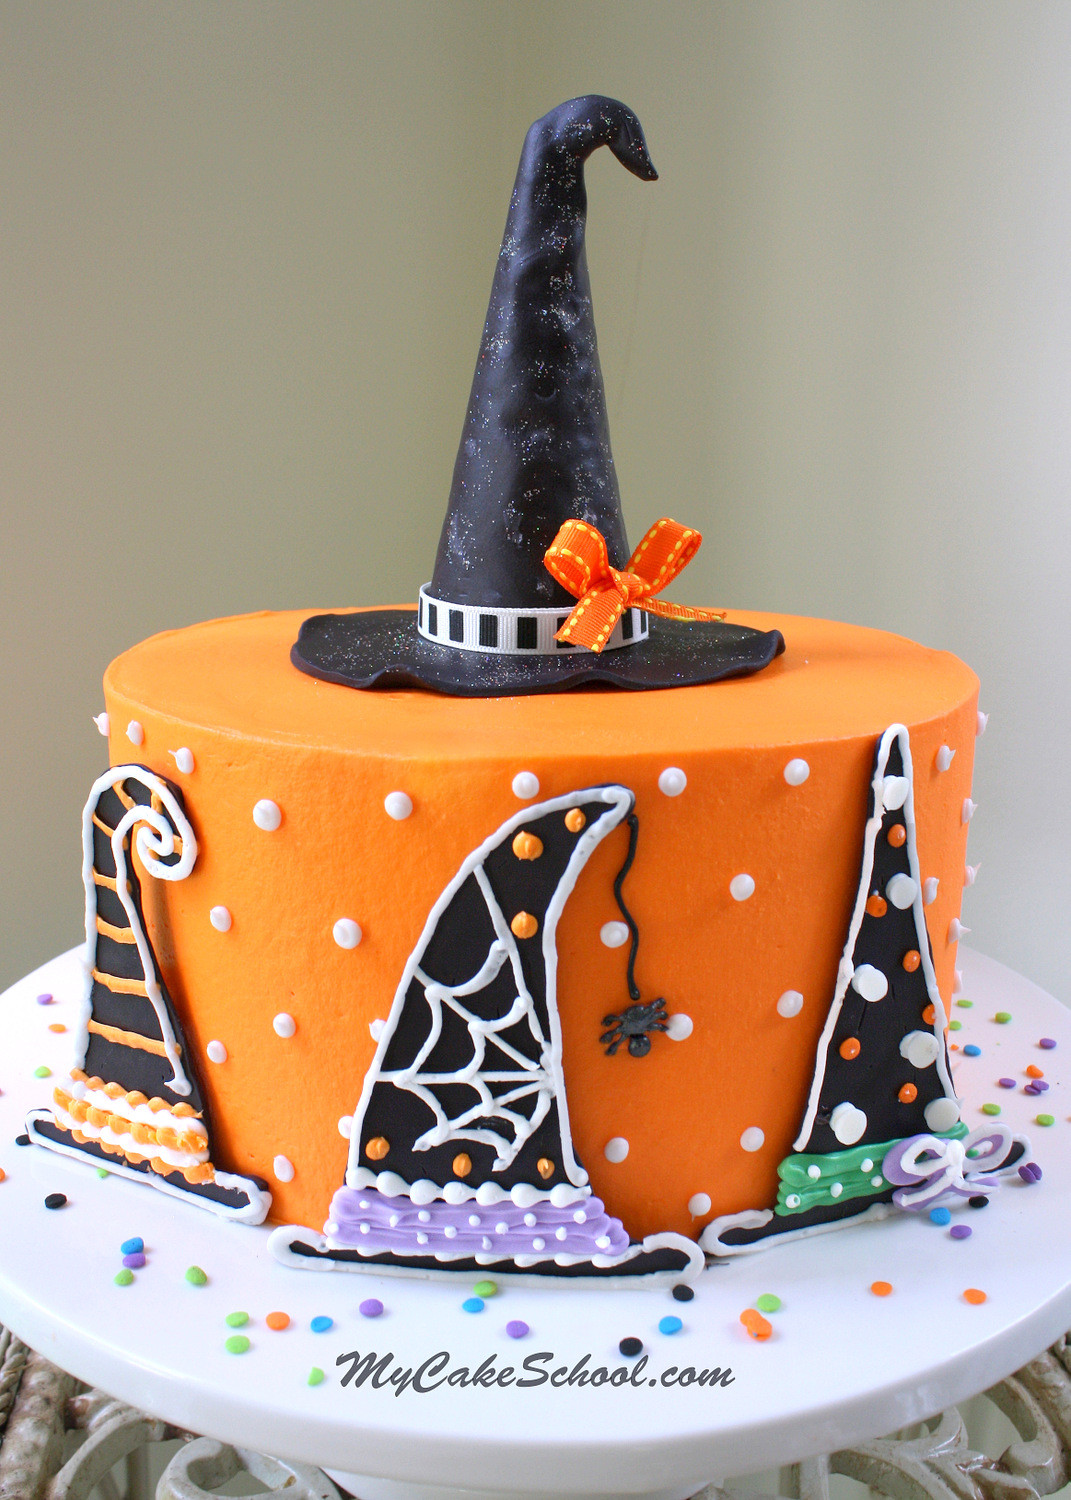 Halloween Cakes Images
 Witch Hats A Halloween Cake Decorating Tutorial